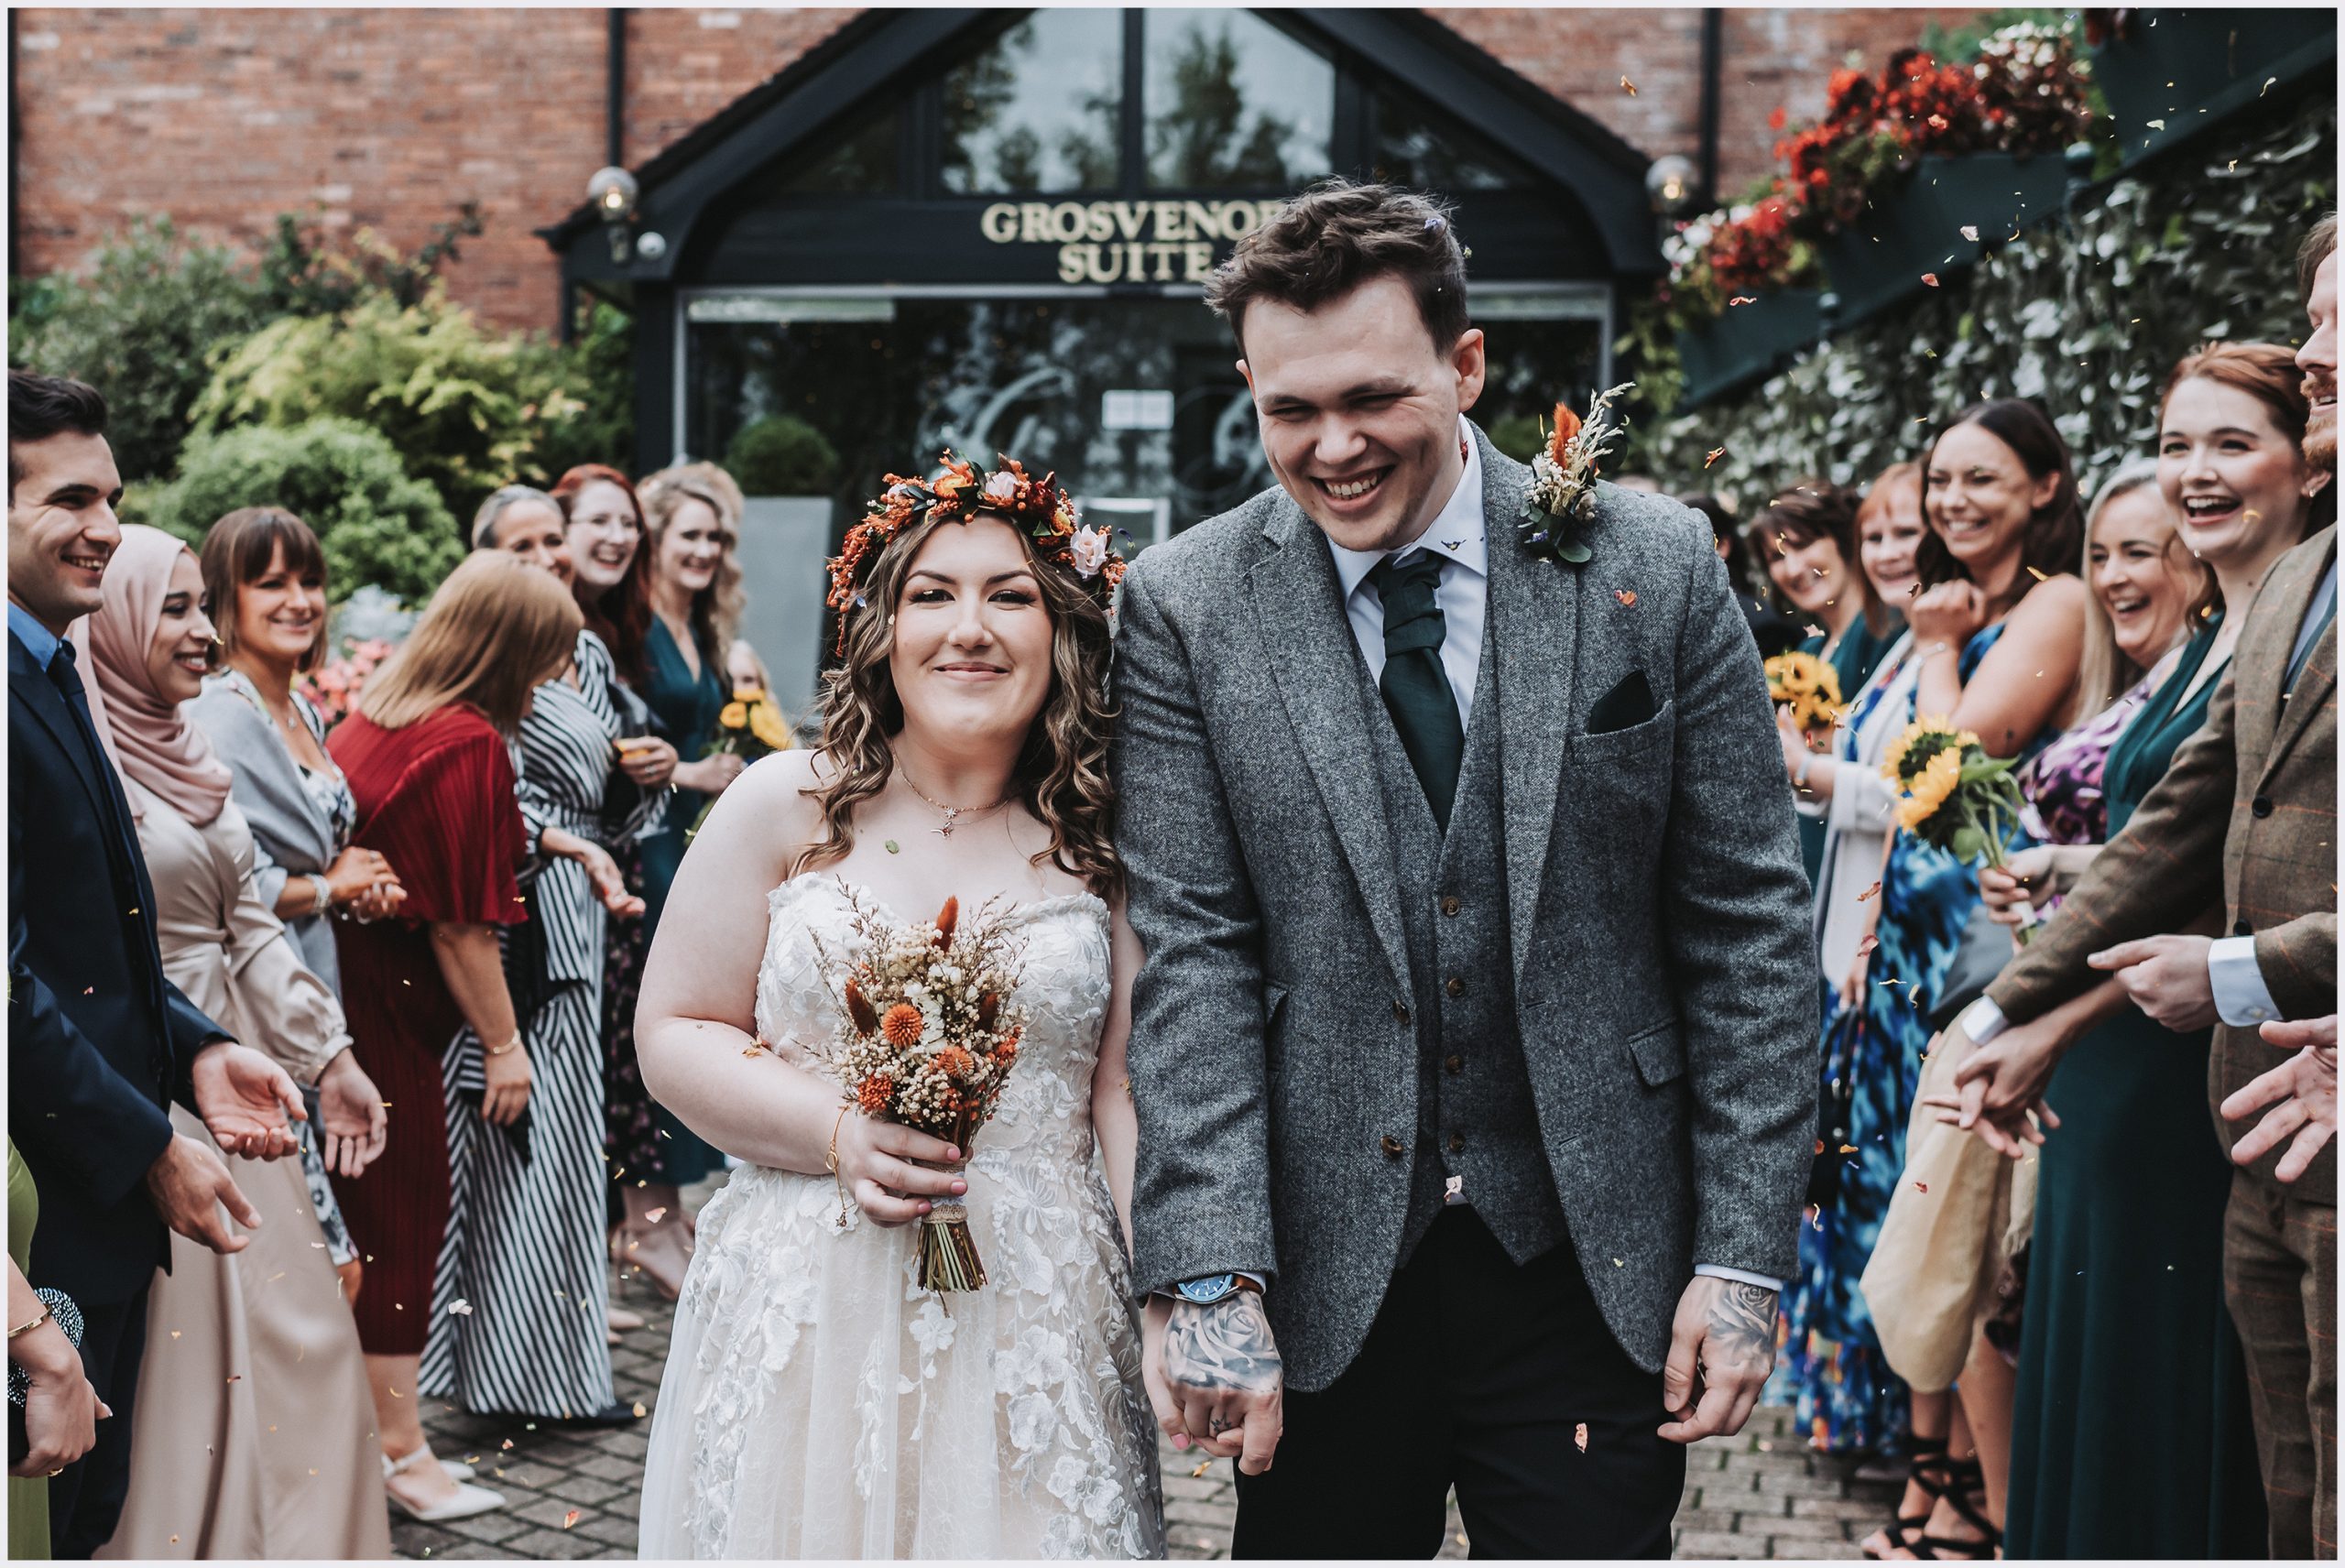 A beautiful bride and her new husband smile and laugh as guests shower them with confetti after the wedding ceremony.  Image captured by north wales wedding photographer Helena Jayne Photography